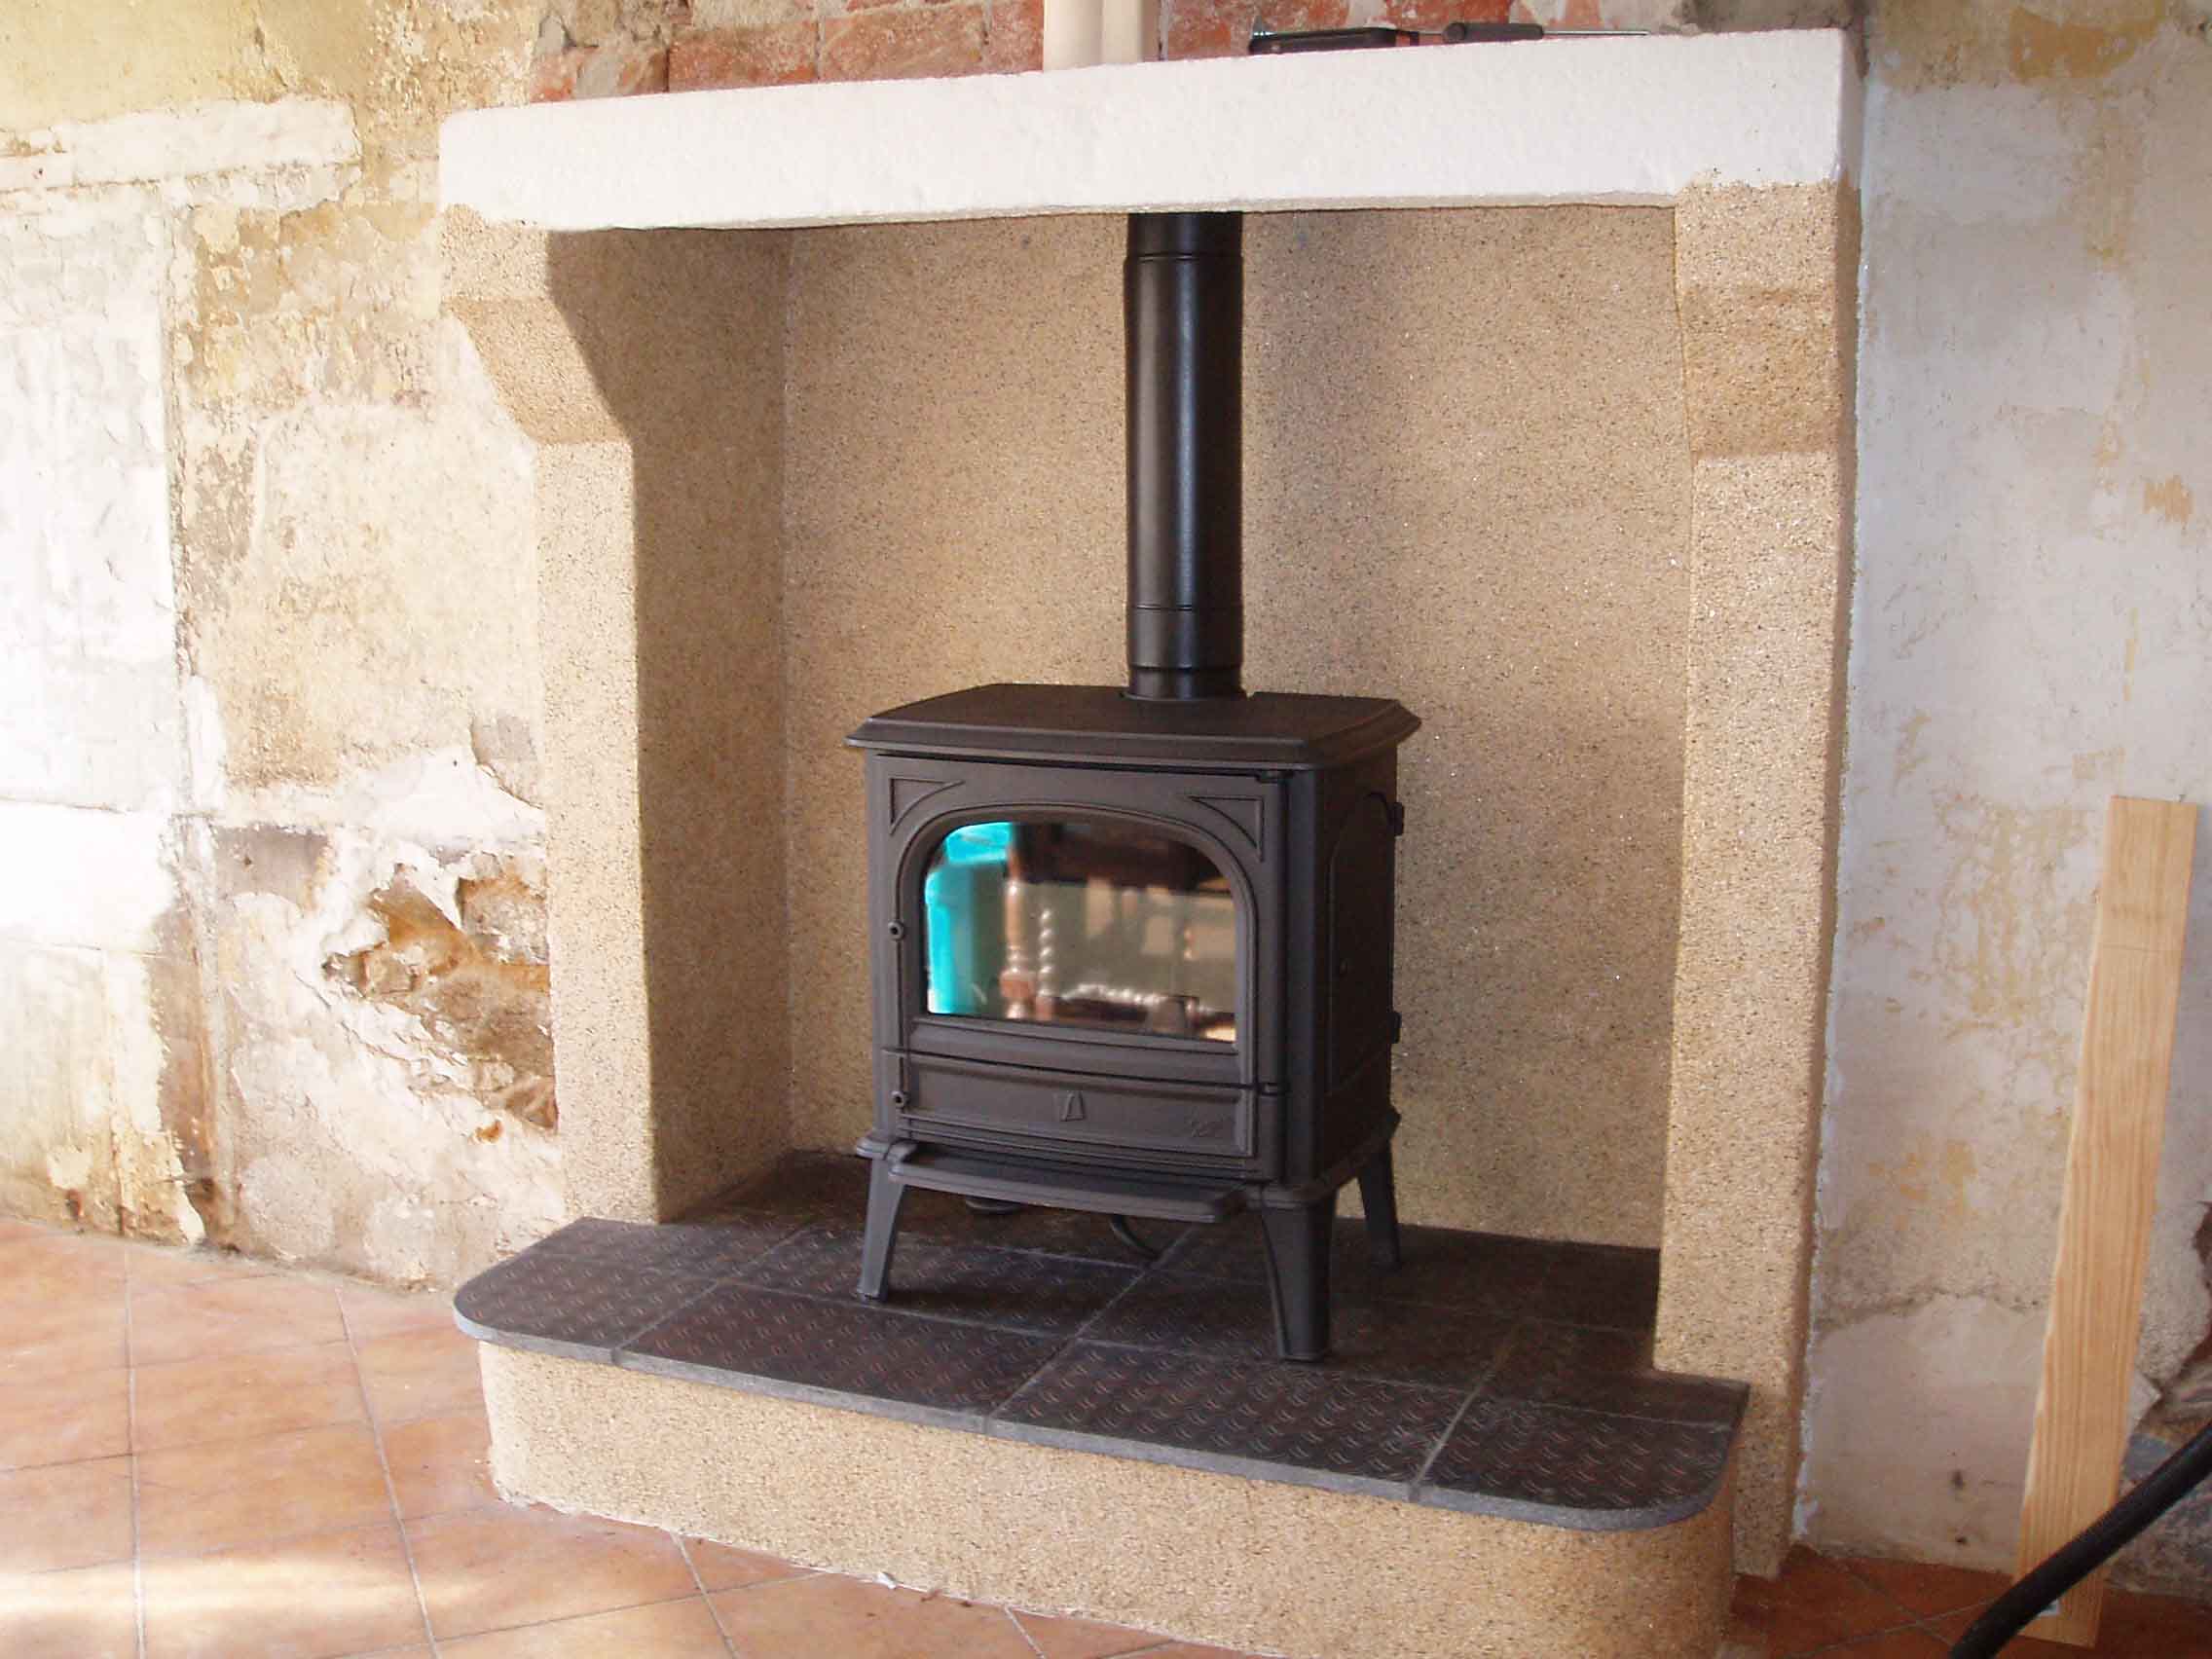 Image of New stove installed